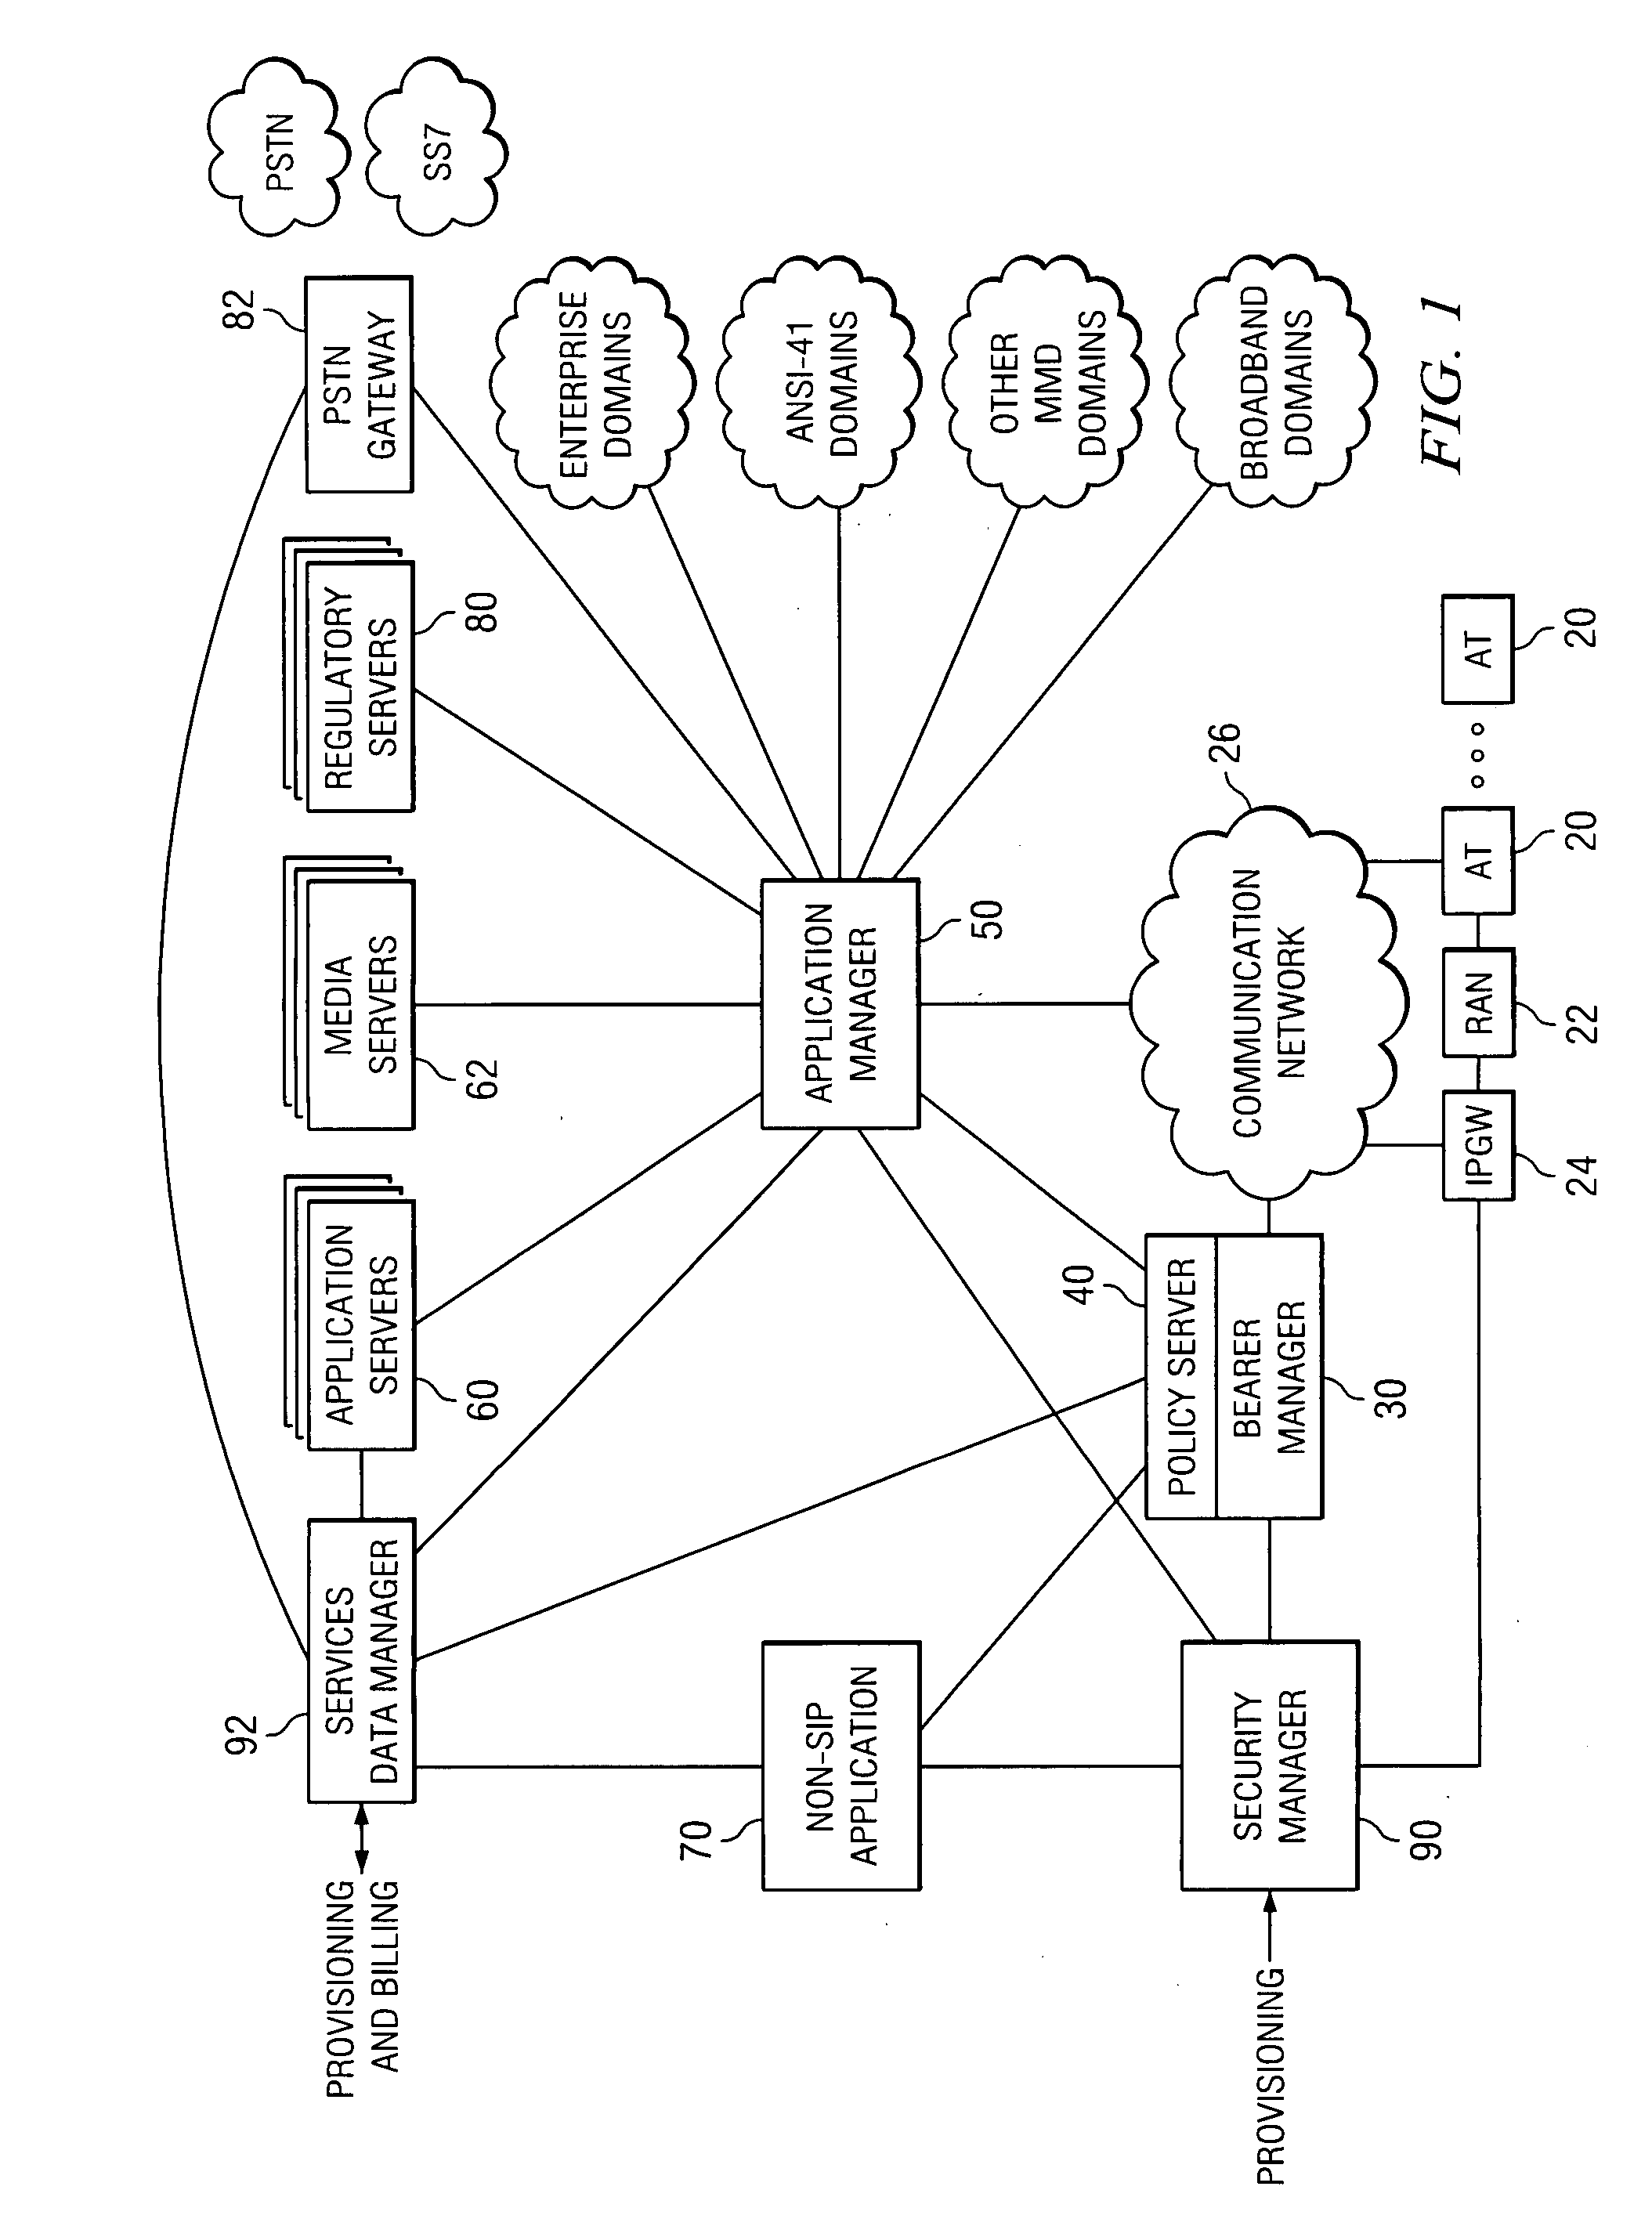 System and method for generating a unified accounting record for a communication session